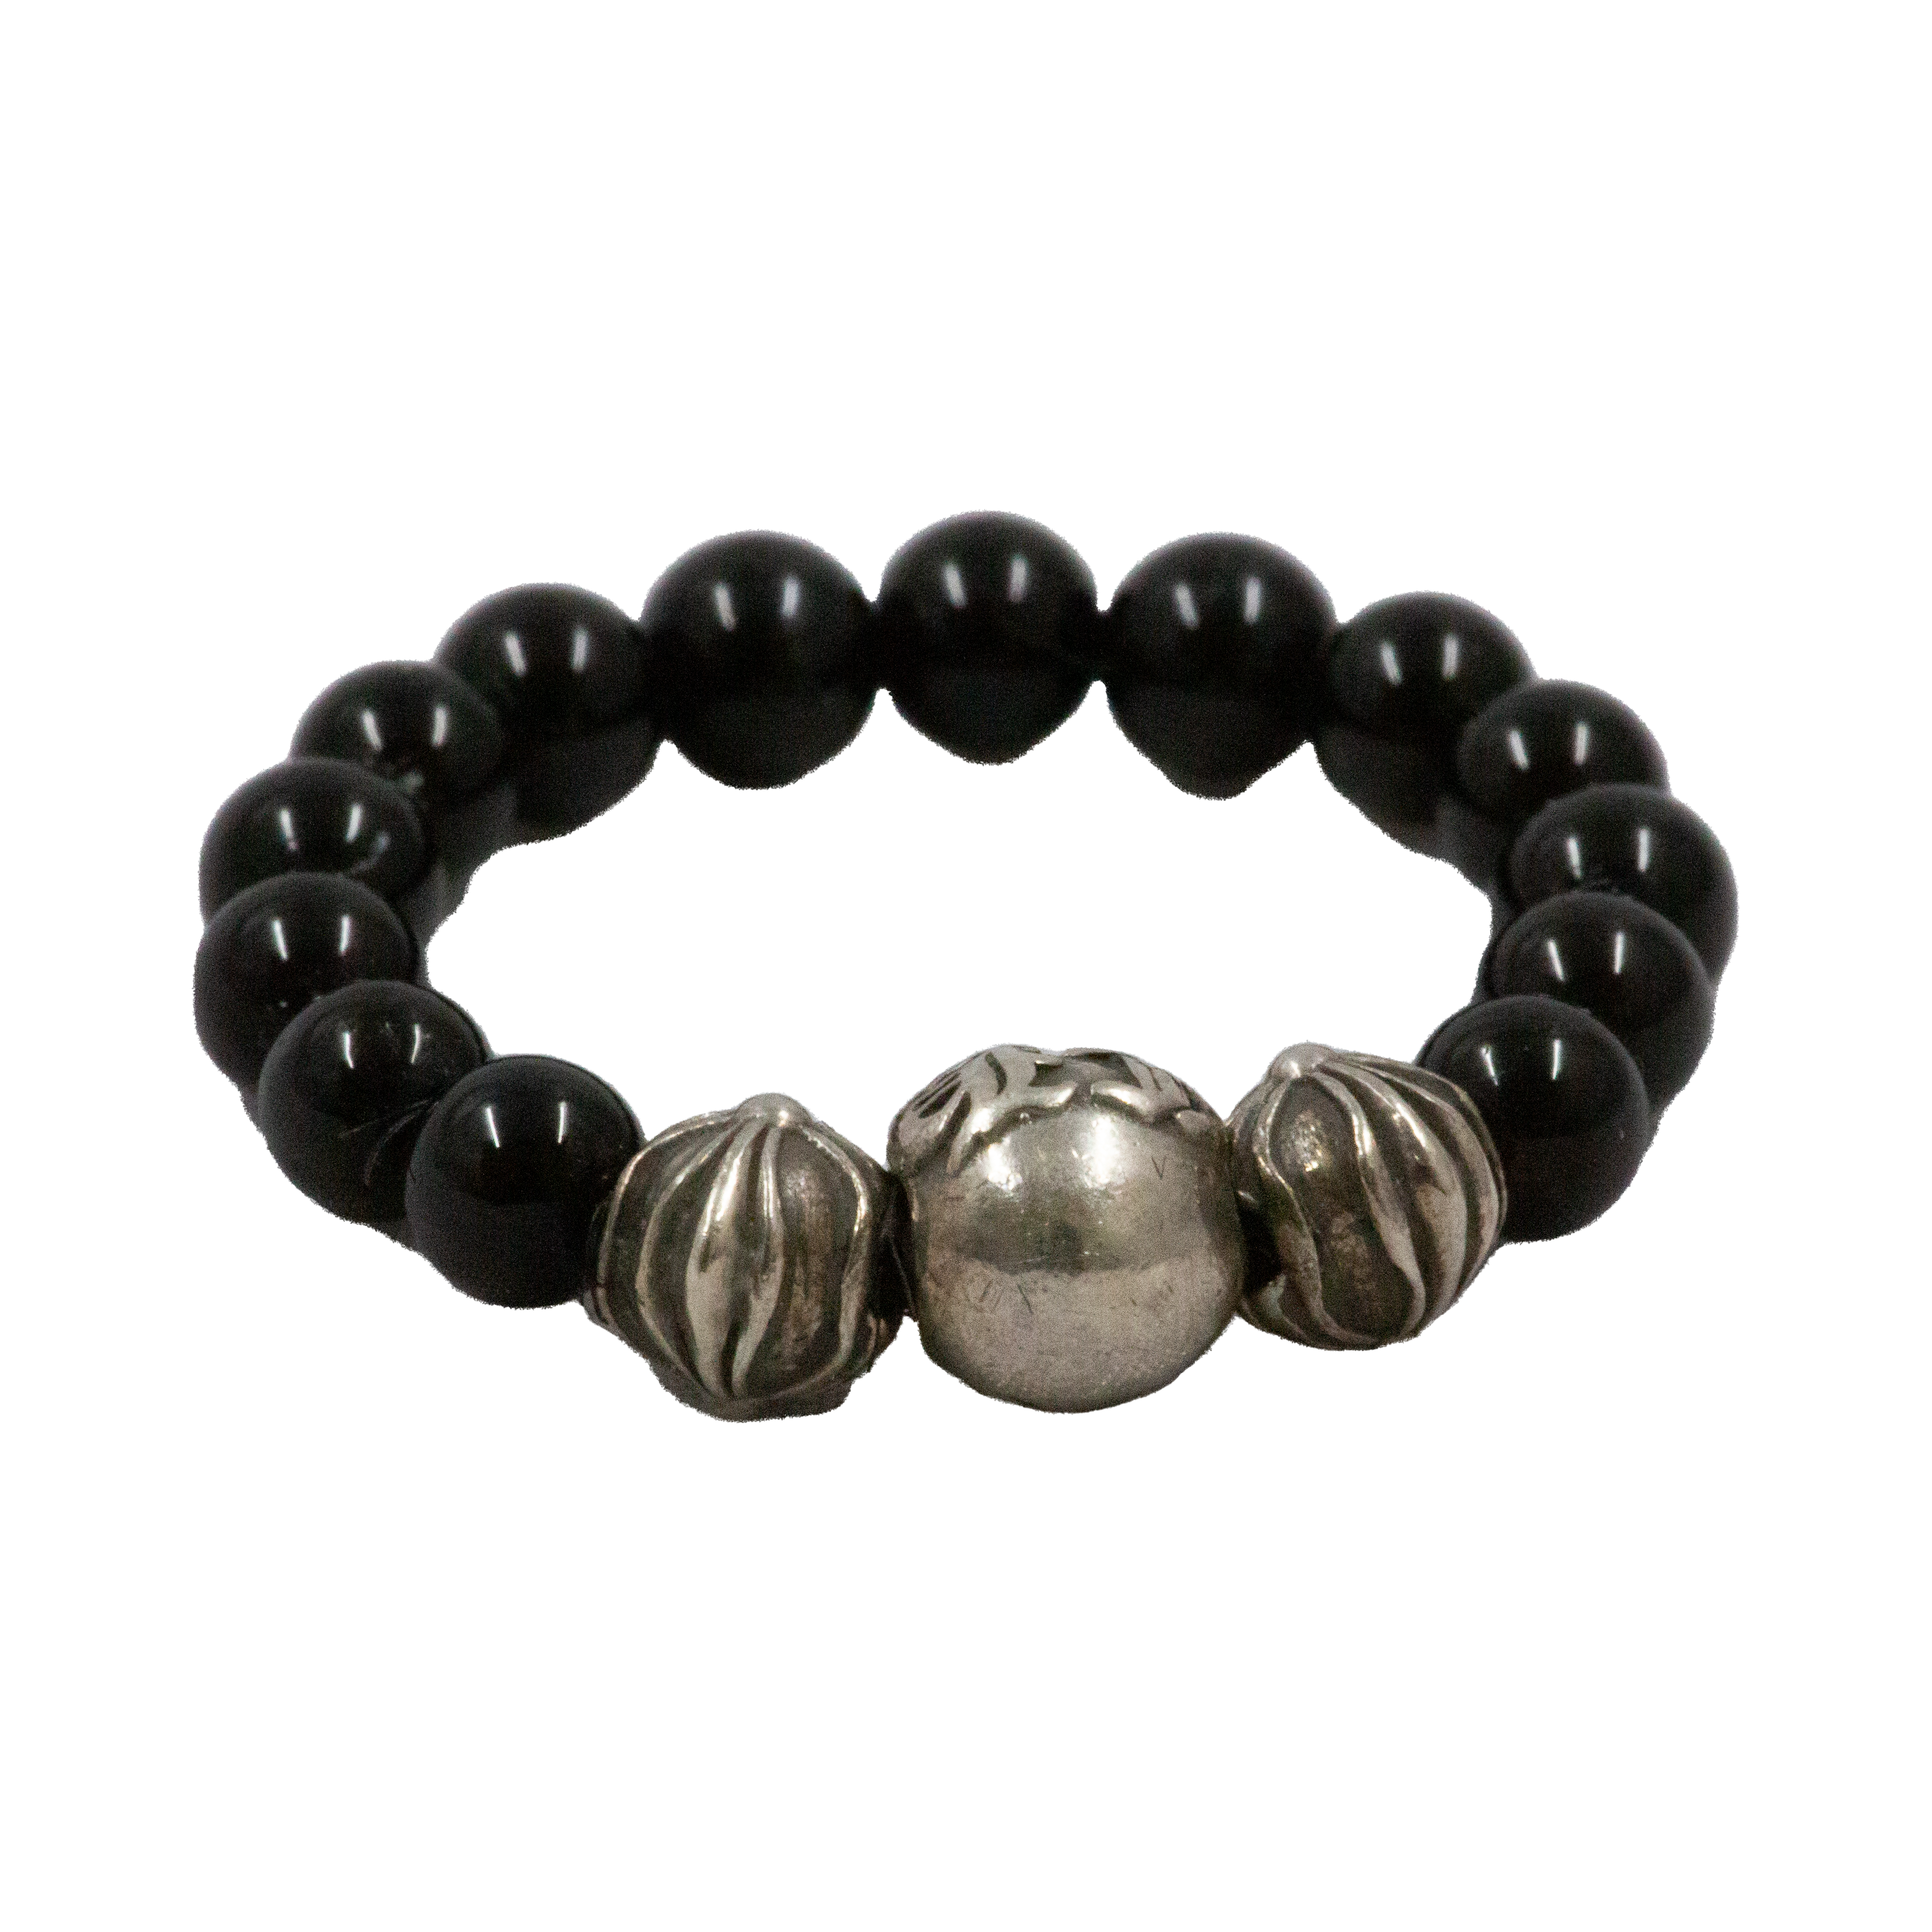 Chrome hearts beads onyx Ring Silver